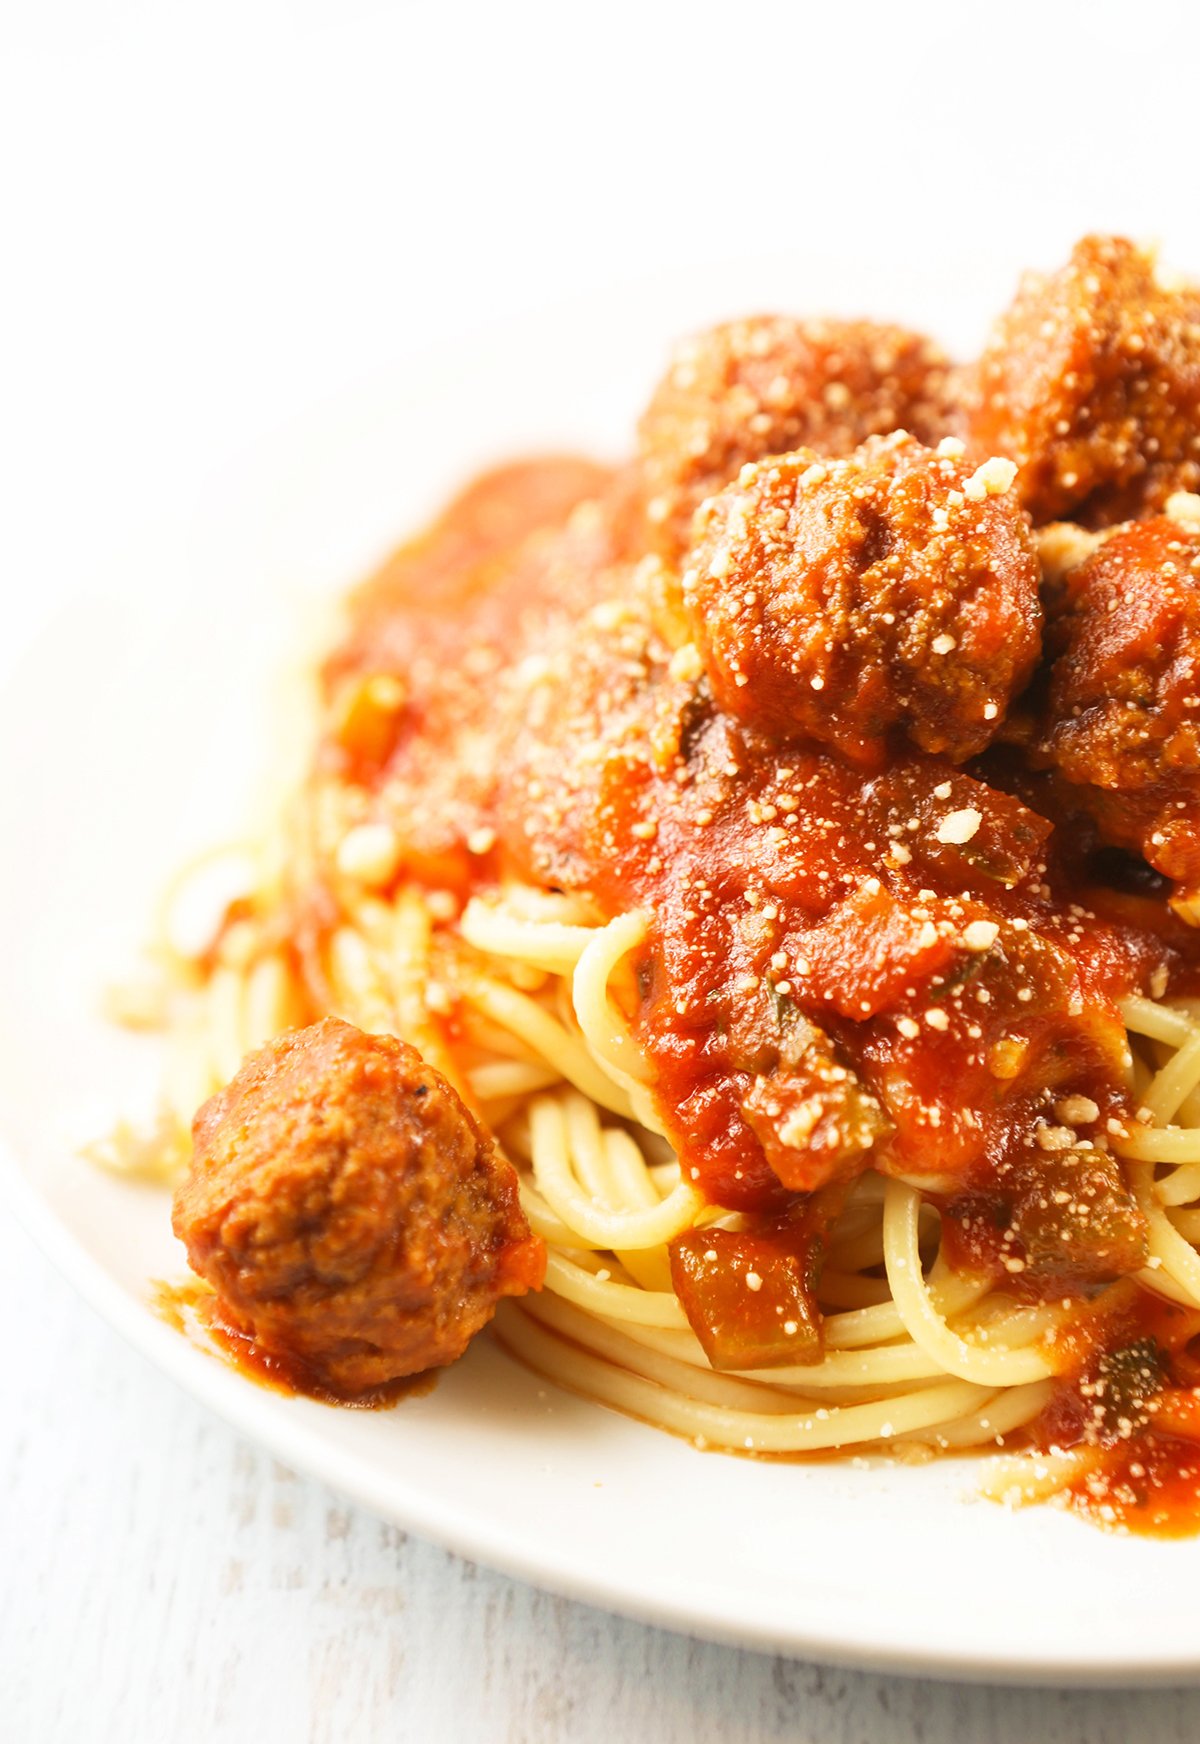 Huge heaping plate of spaghetti and meatballs.